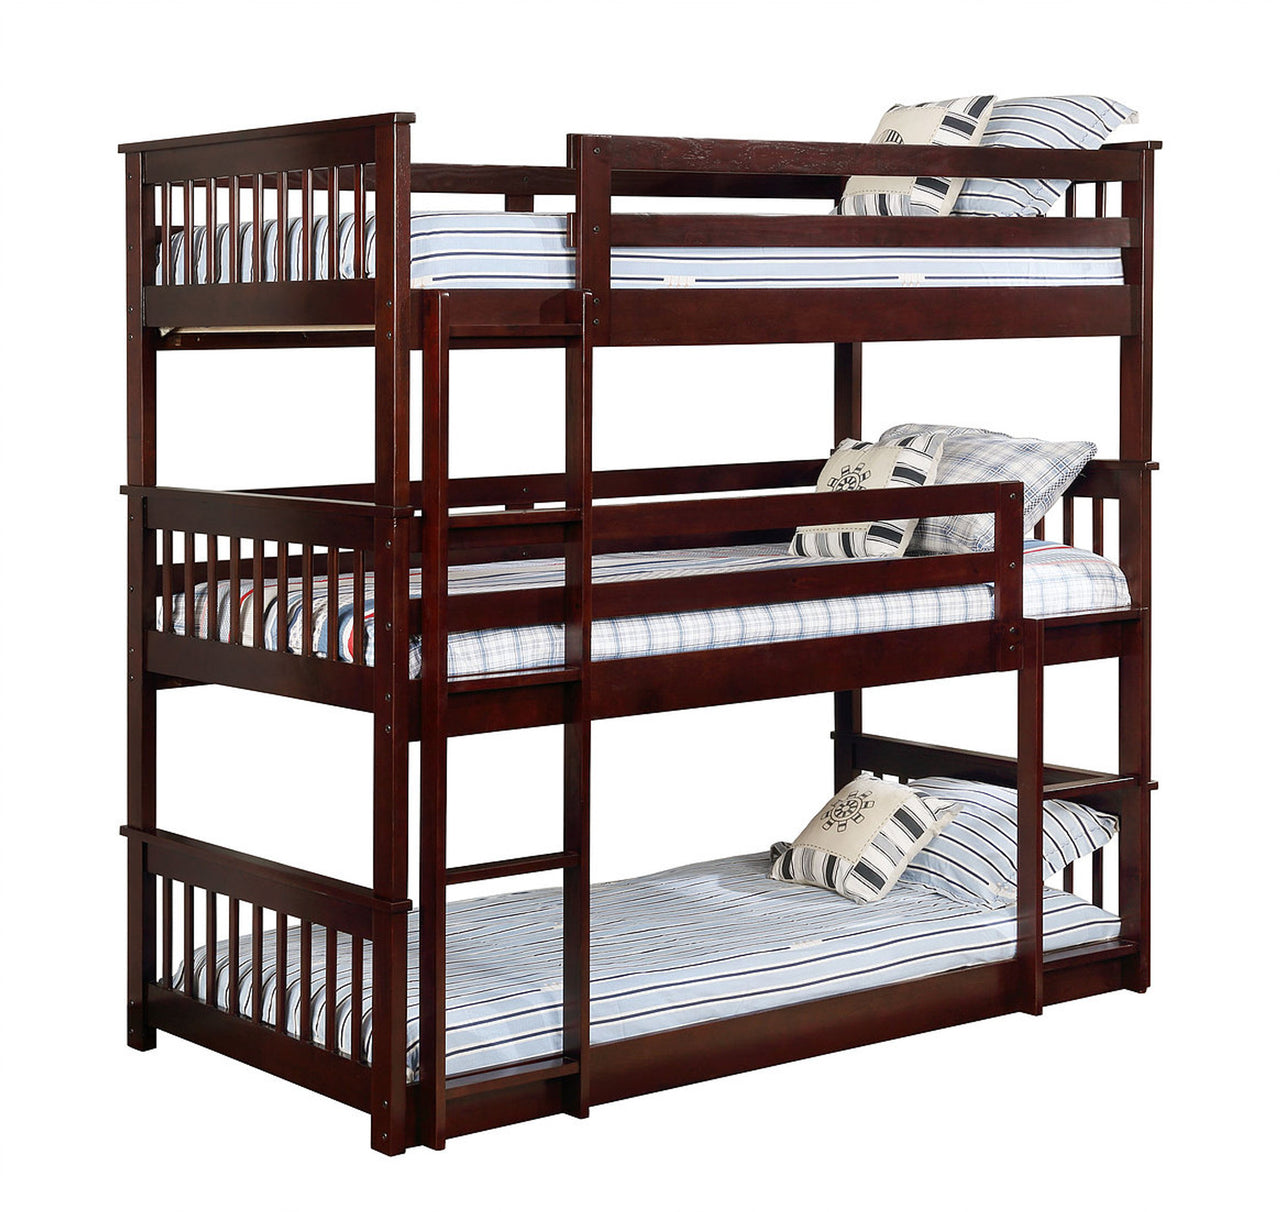 HH 4100 Triple Twin Size Bunk Bed in Cappuccino Color.